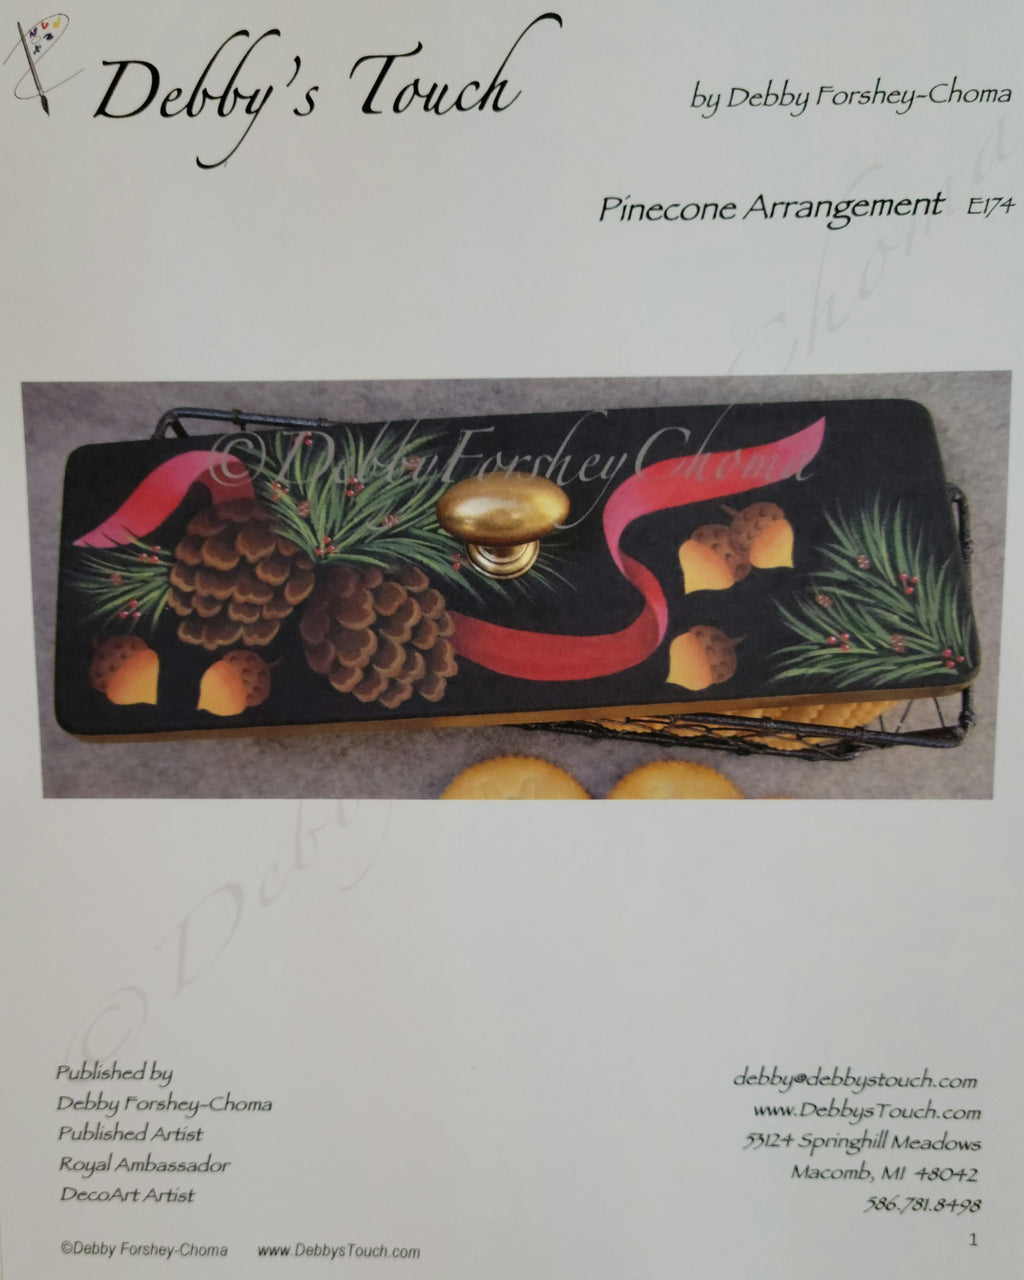 Pinecone Arrangement packet by Debby's Touch